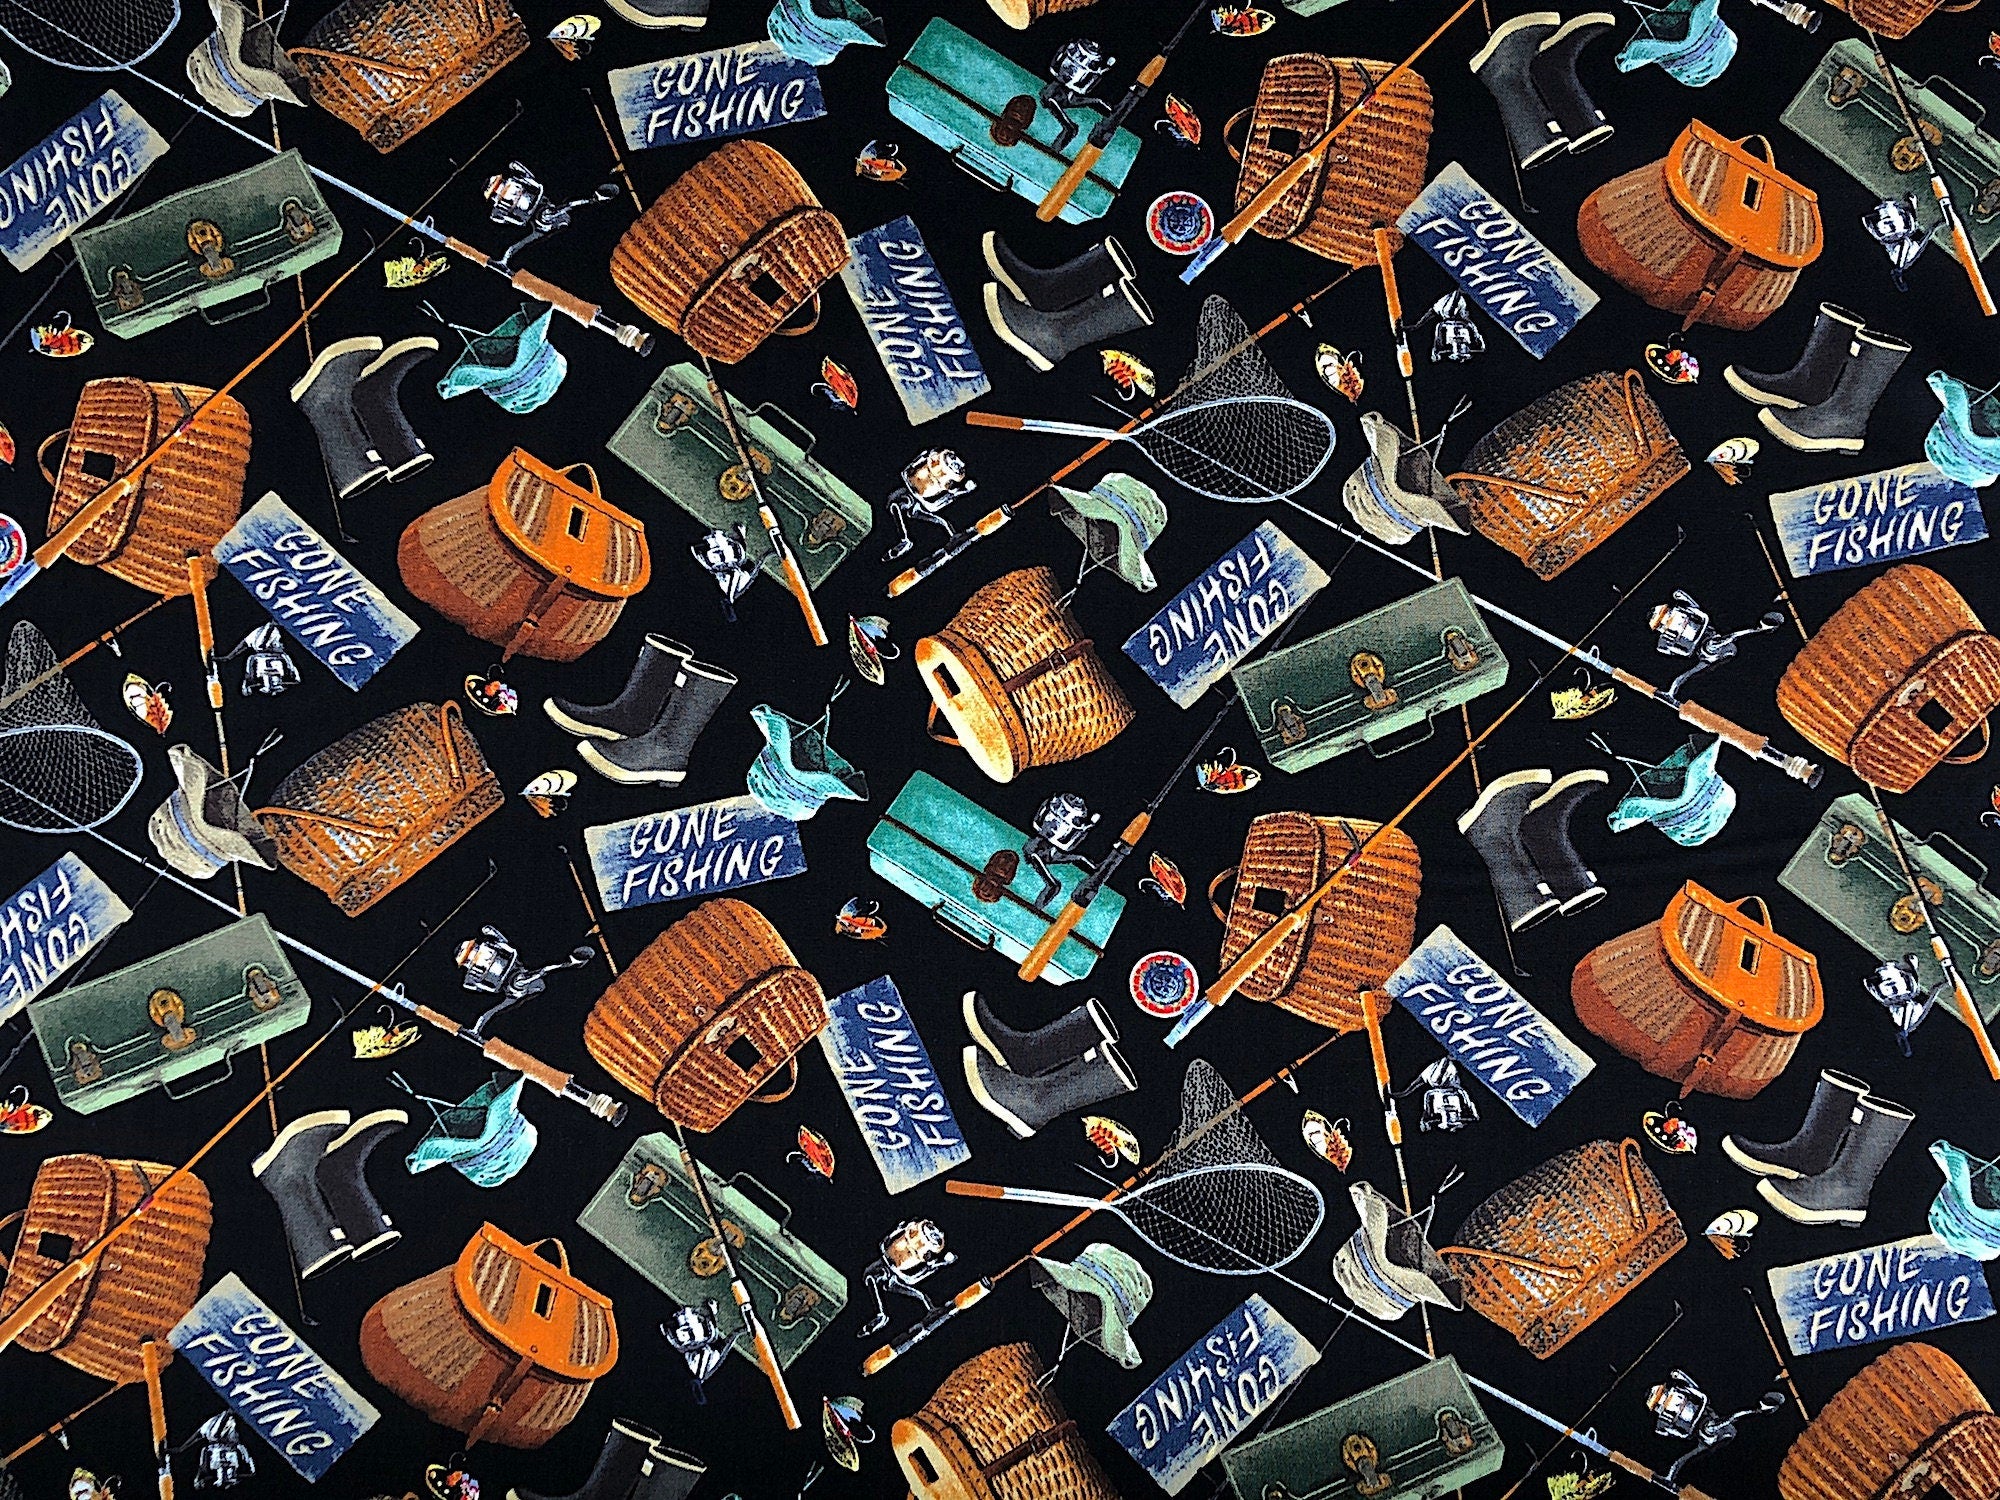 This fabric is called Fishing Gear and is covered with tackle boxes, fishing poles, fishing hats, nets, boots, fish baskets and Gone fishing signs. The background is black.